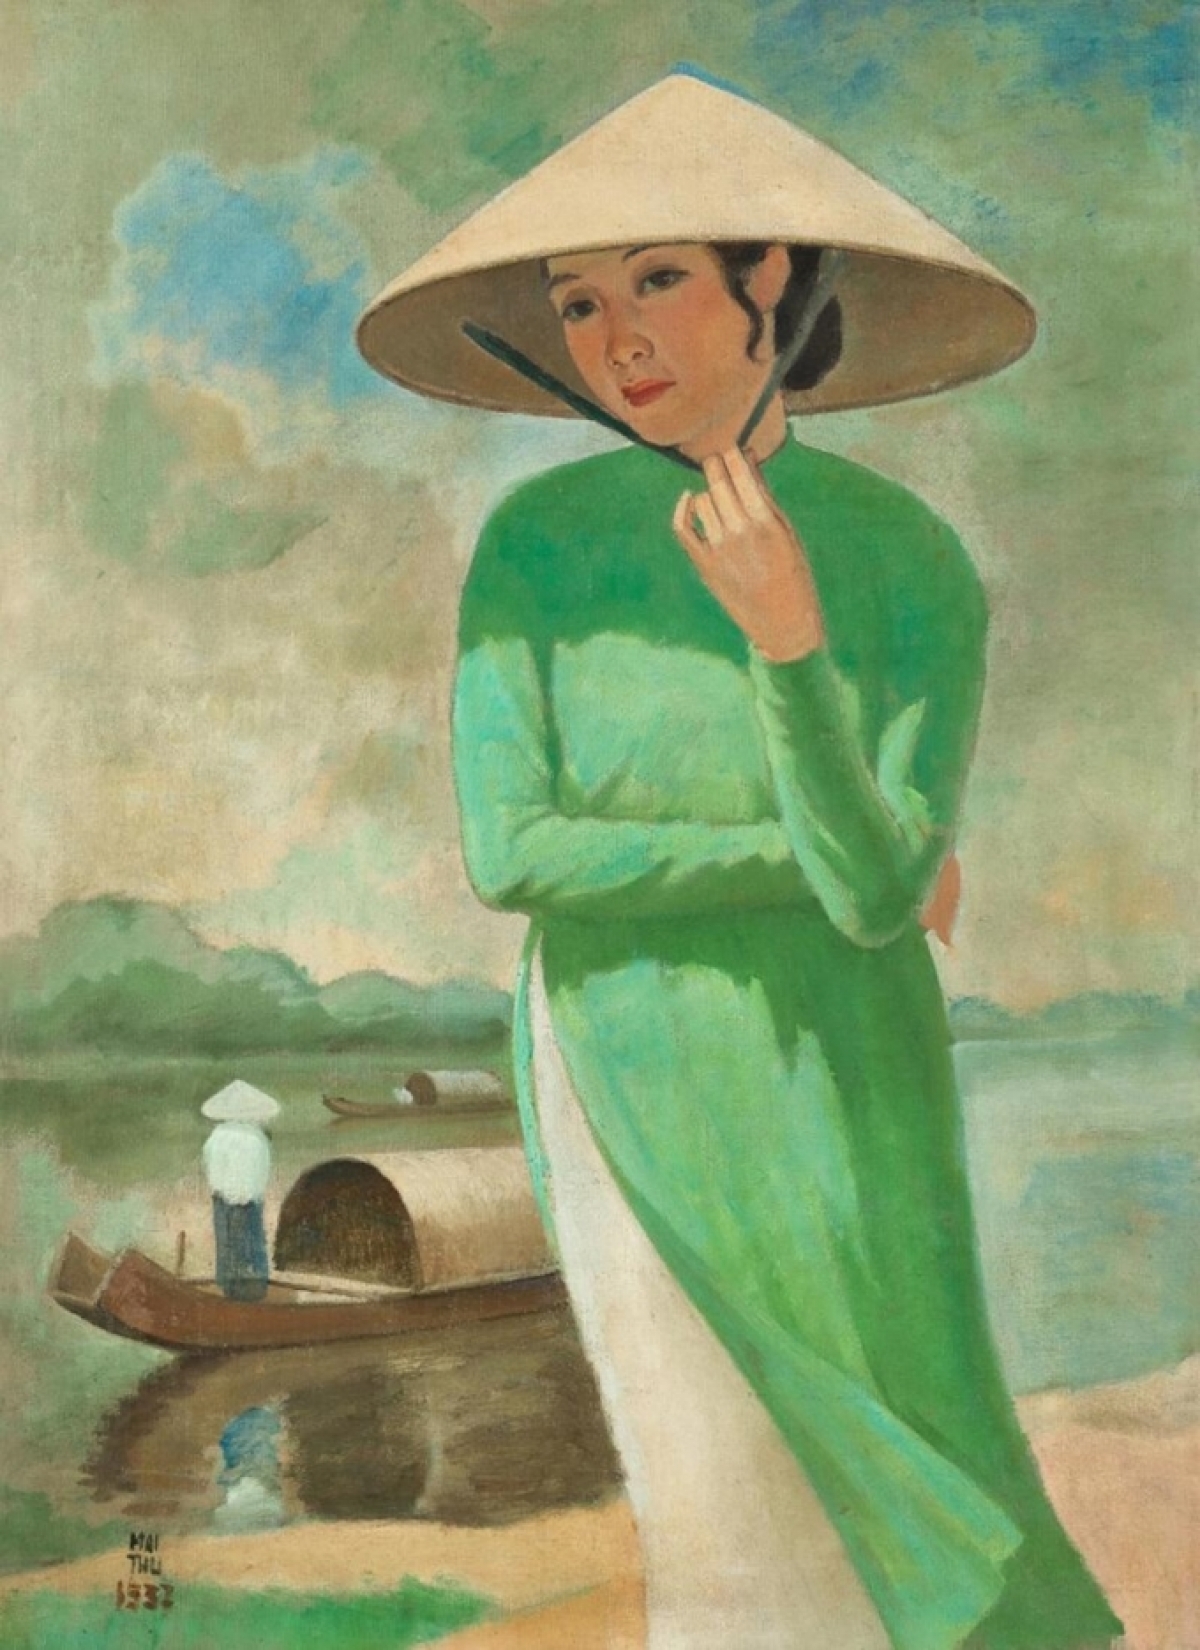 VN painting auctioned for US$1.57 million at Sotheby’s Hong Kong